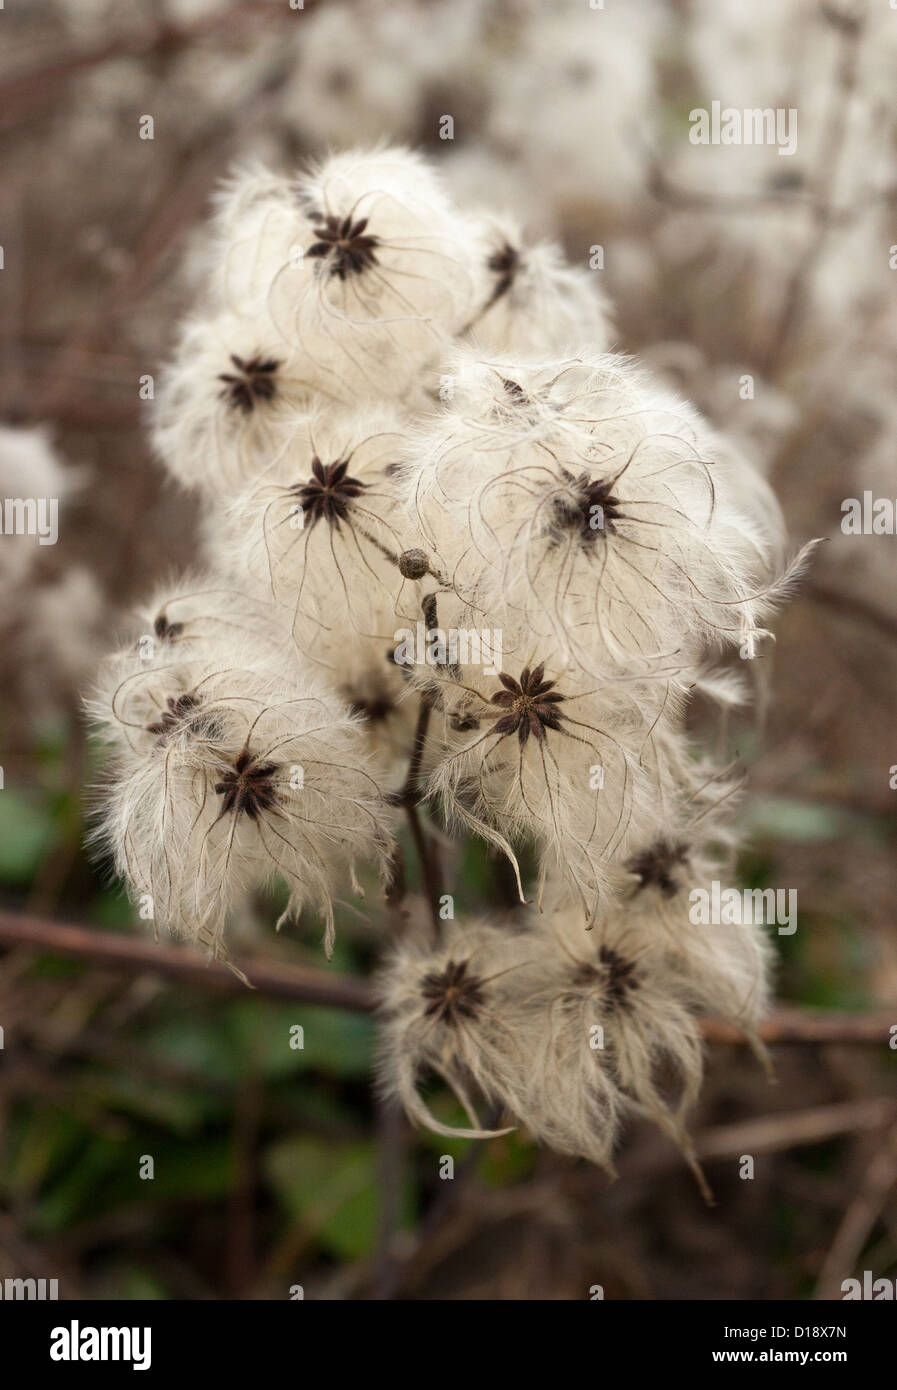 Clematis Vitalba seeds in a Winter hedgerow Stock Photo